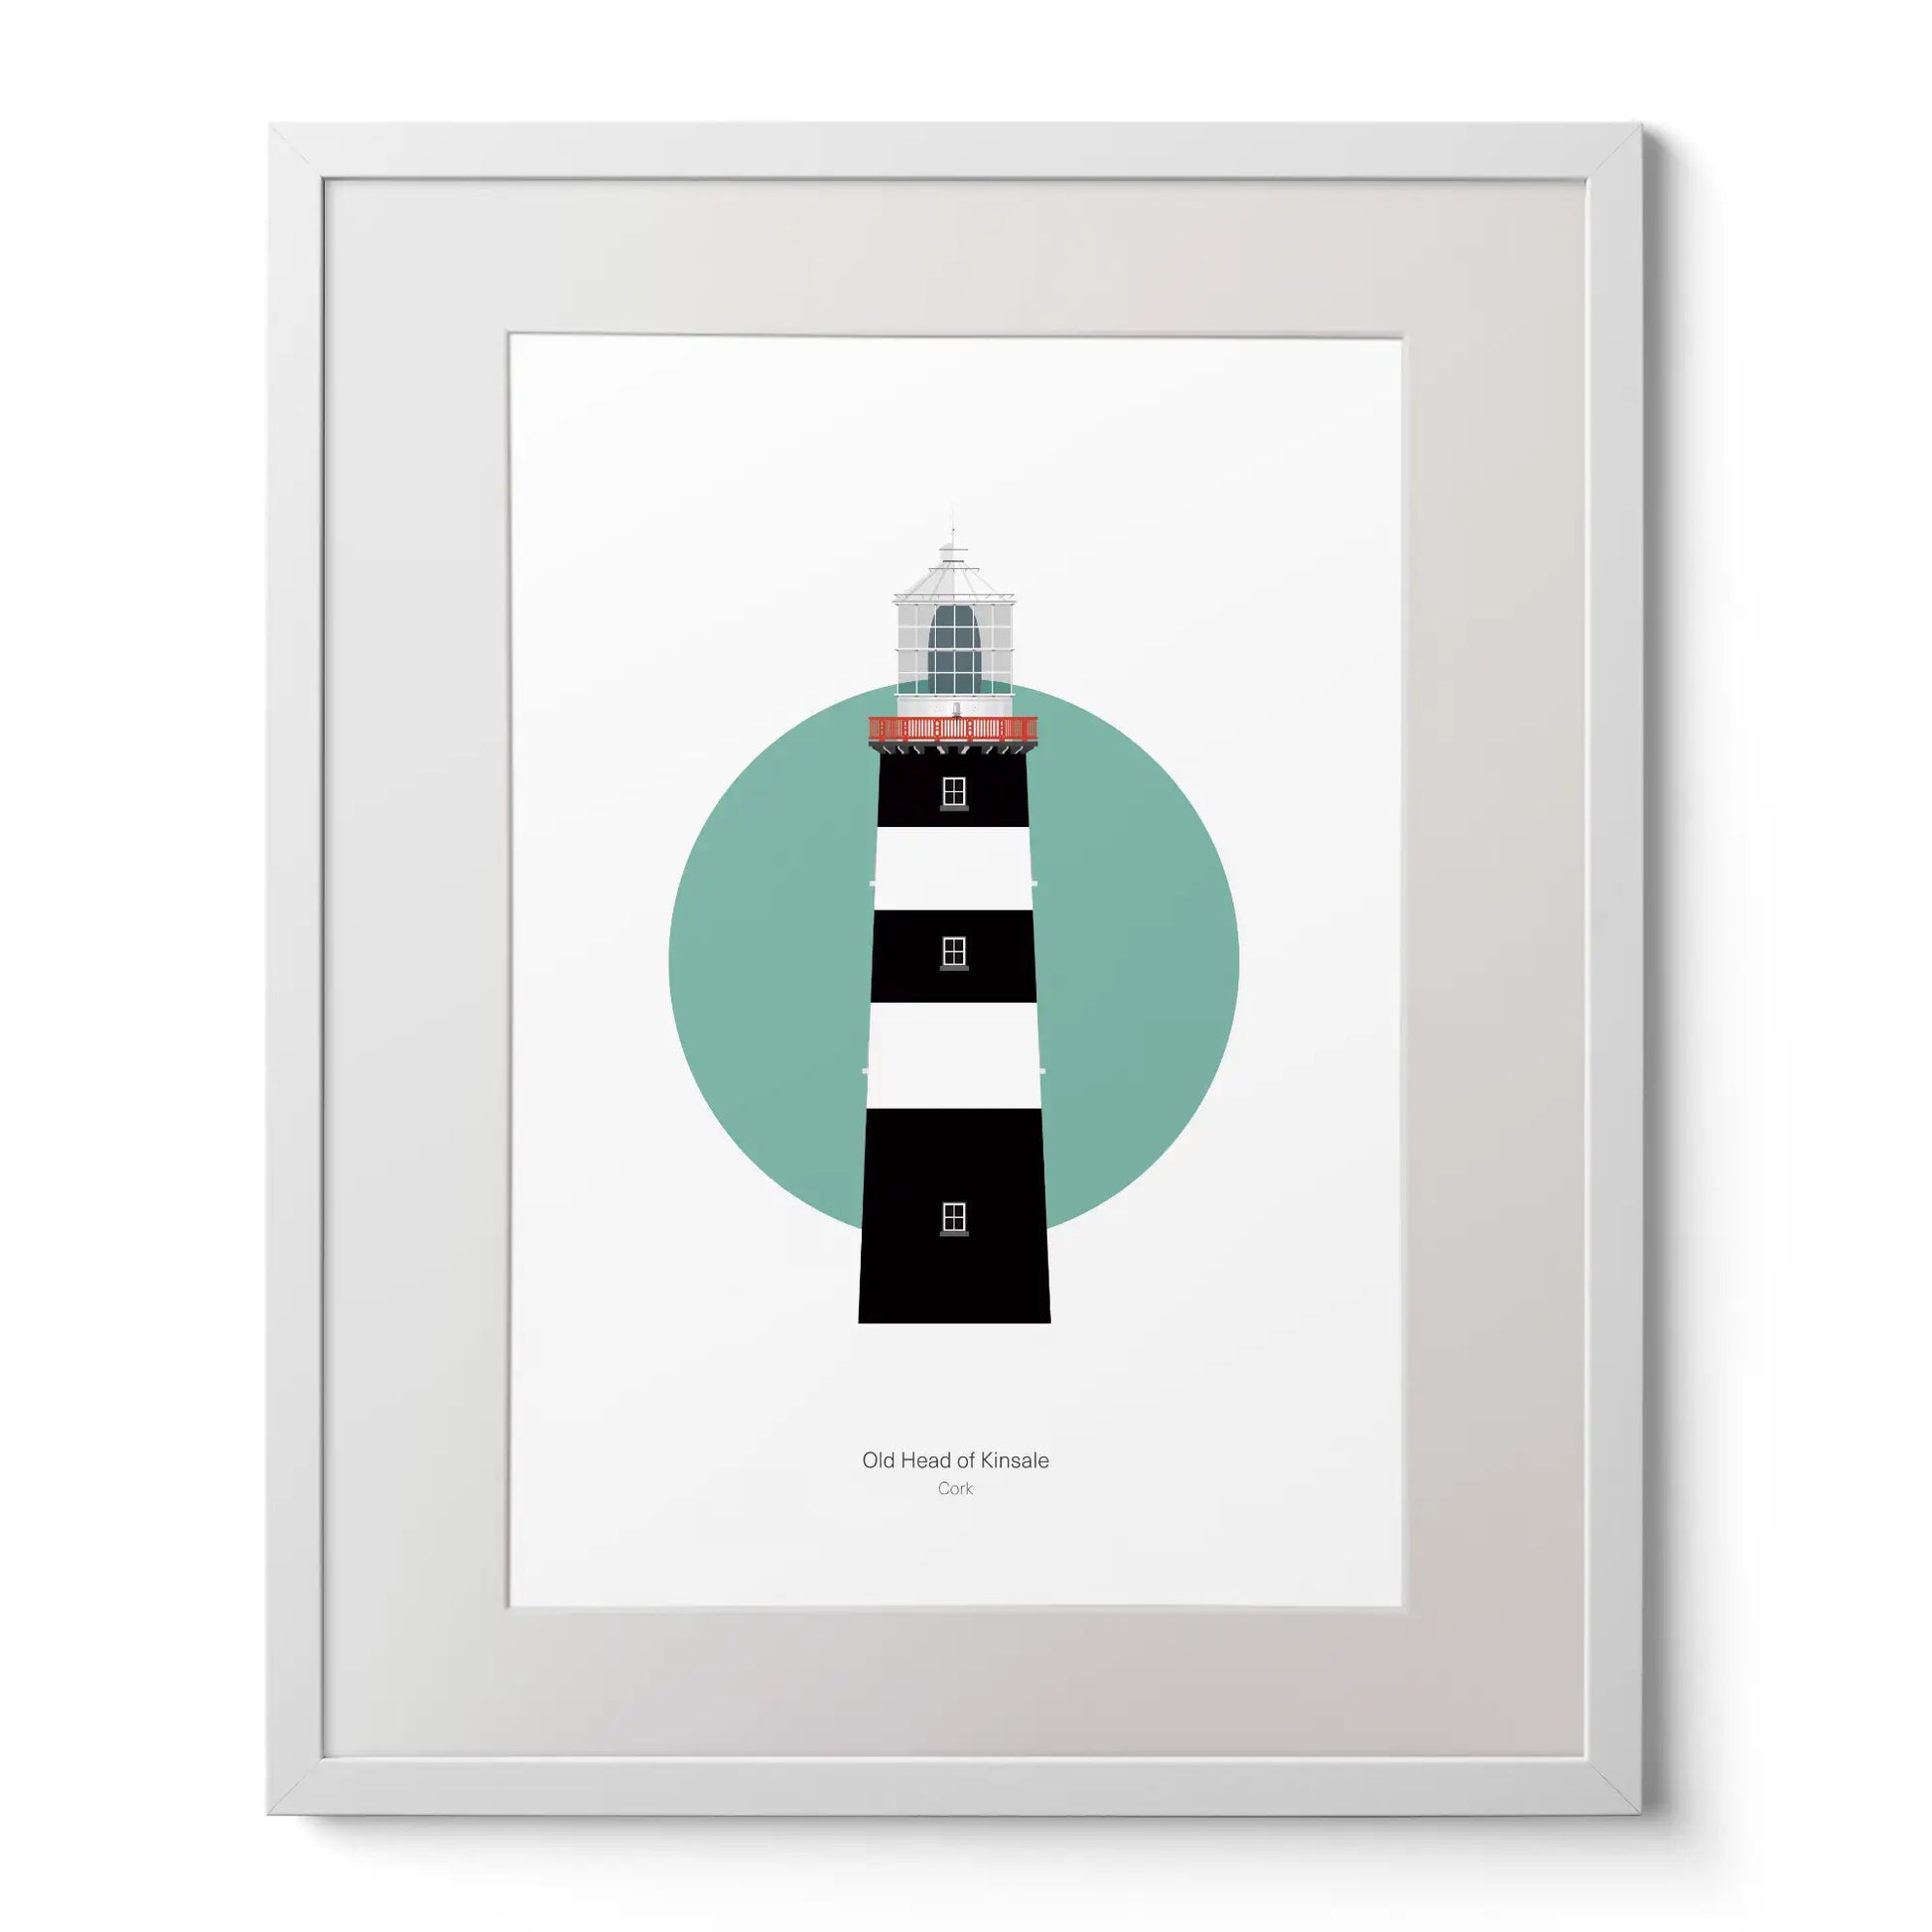 Illustration of Old Head of Kinsale lighthouse on a white background inside light blue square,  in a white frame measuring 40x50cm.